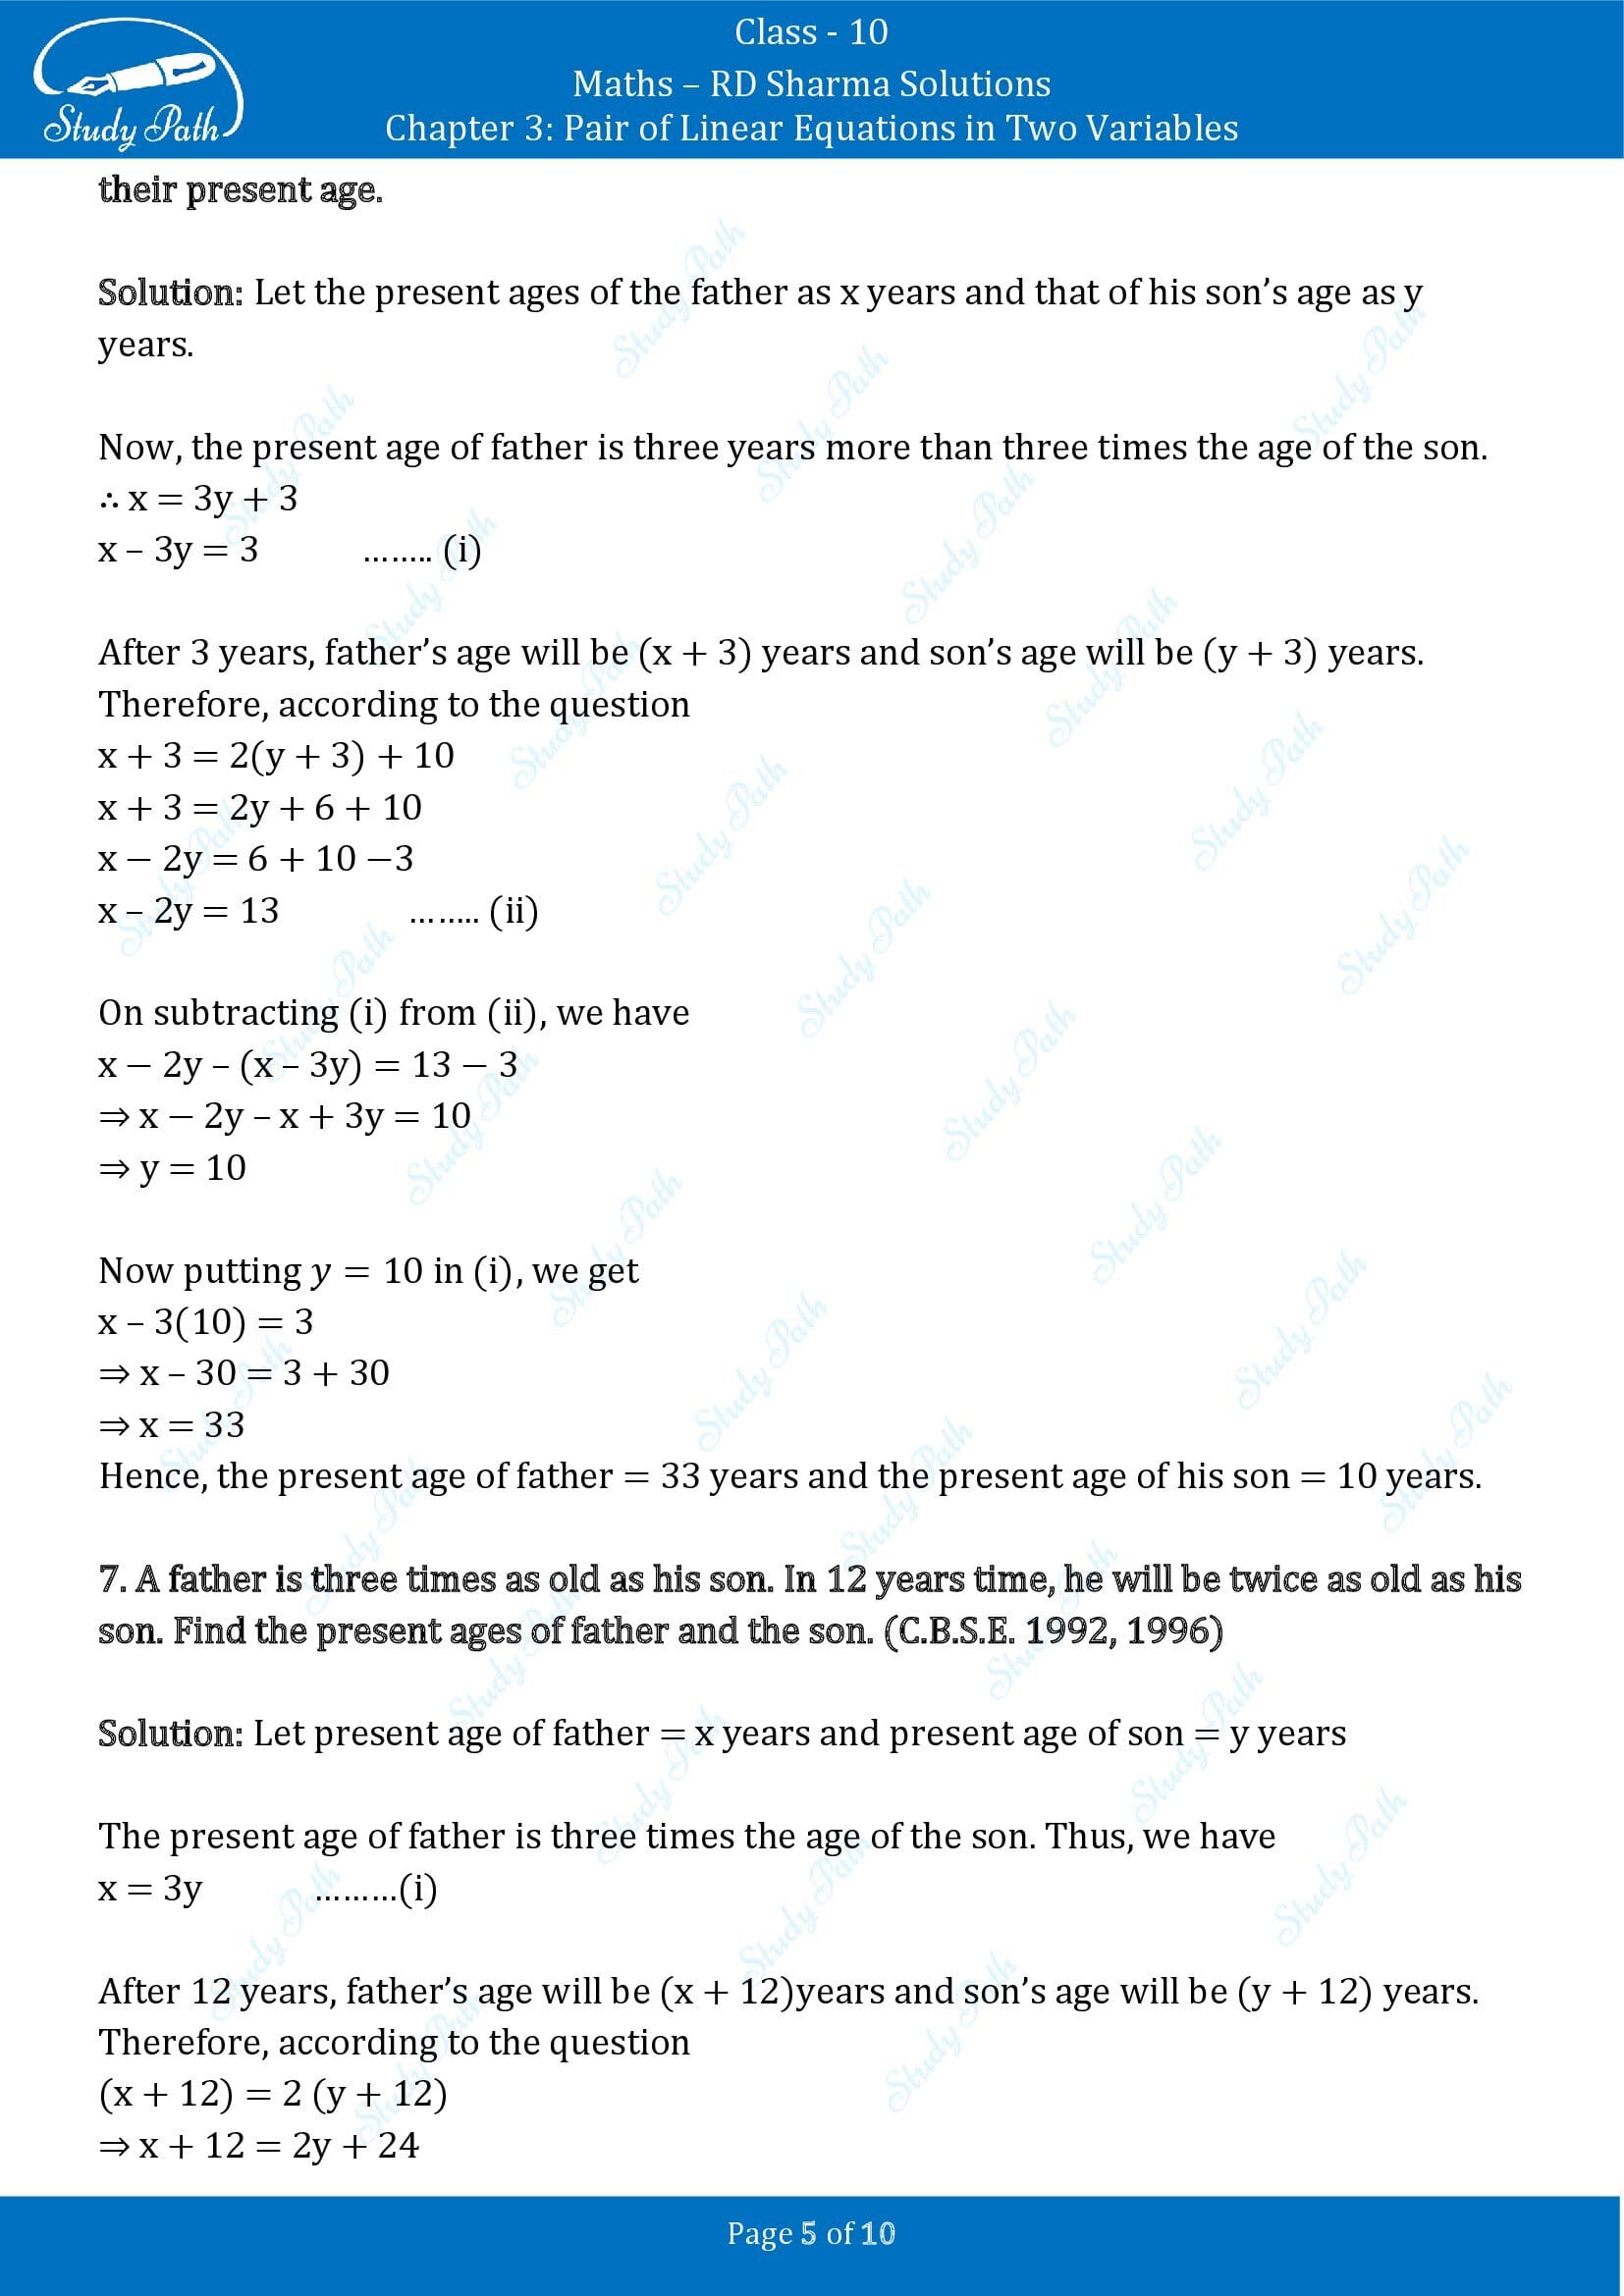 RD Sharma Solutions Class 10 Chapter 3 Pair of Linear Equations in Two Variables Exercise 3.9 00005